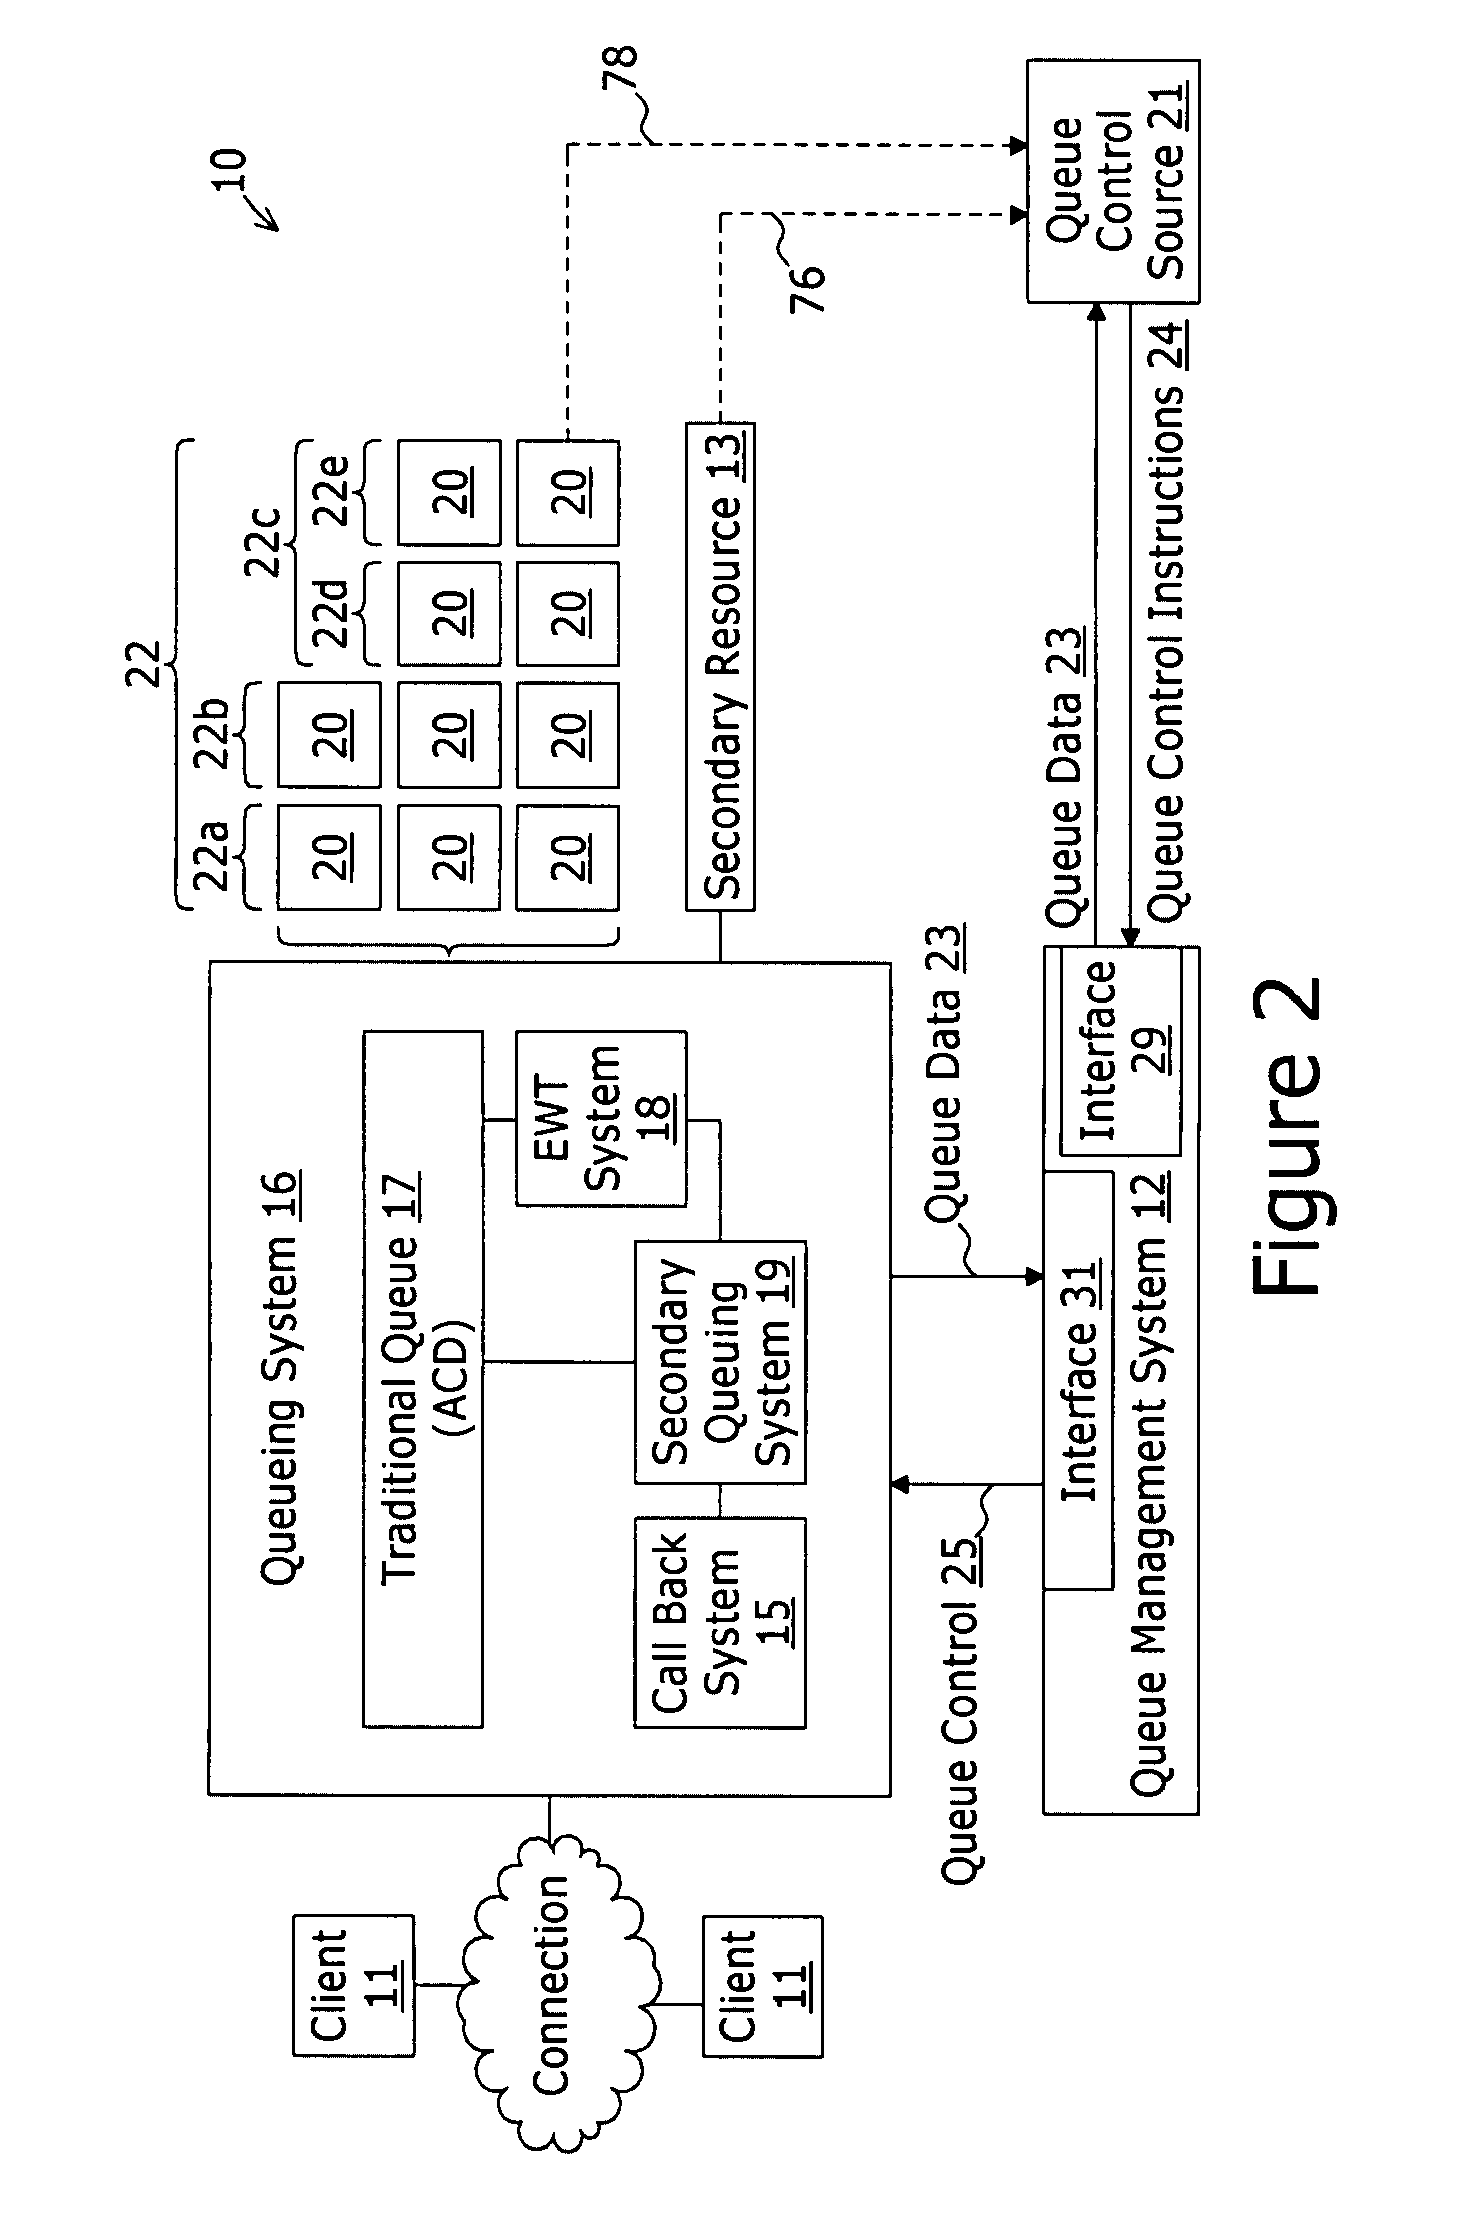 Accessory queue management system and method for interacting with a queuing system